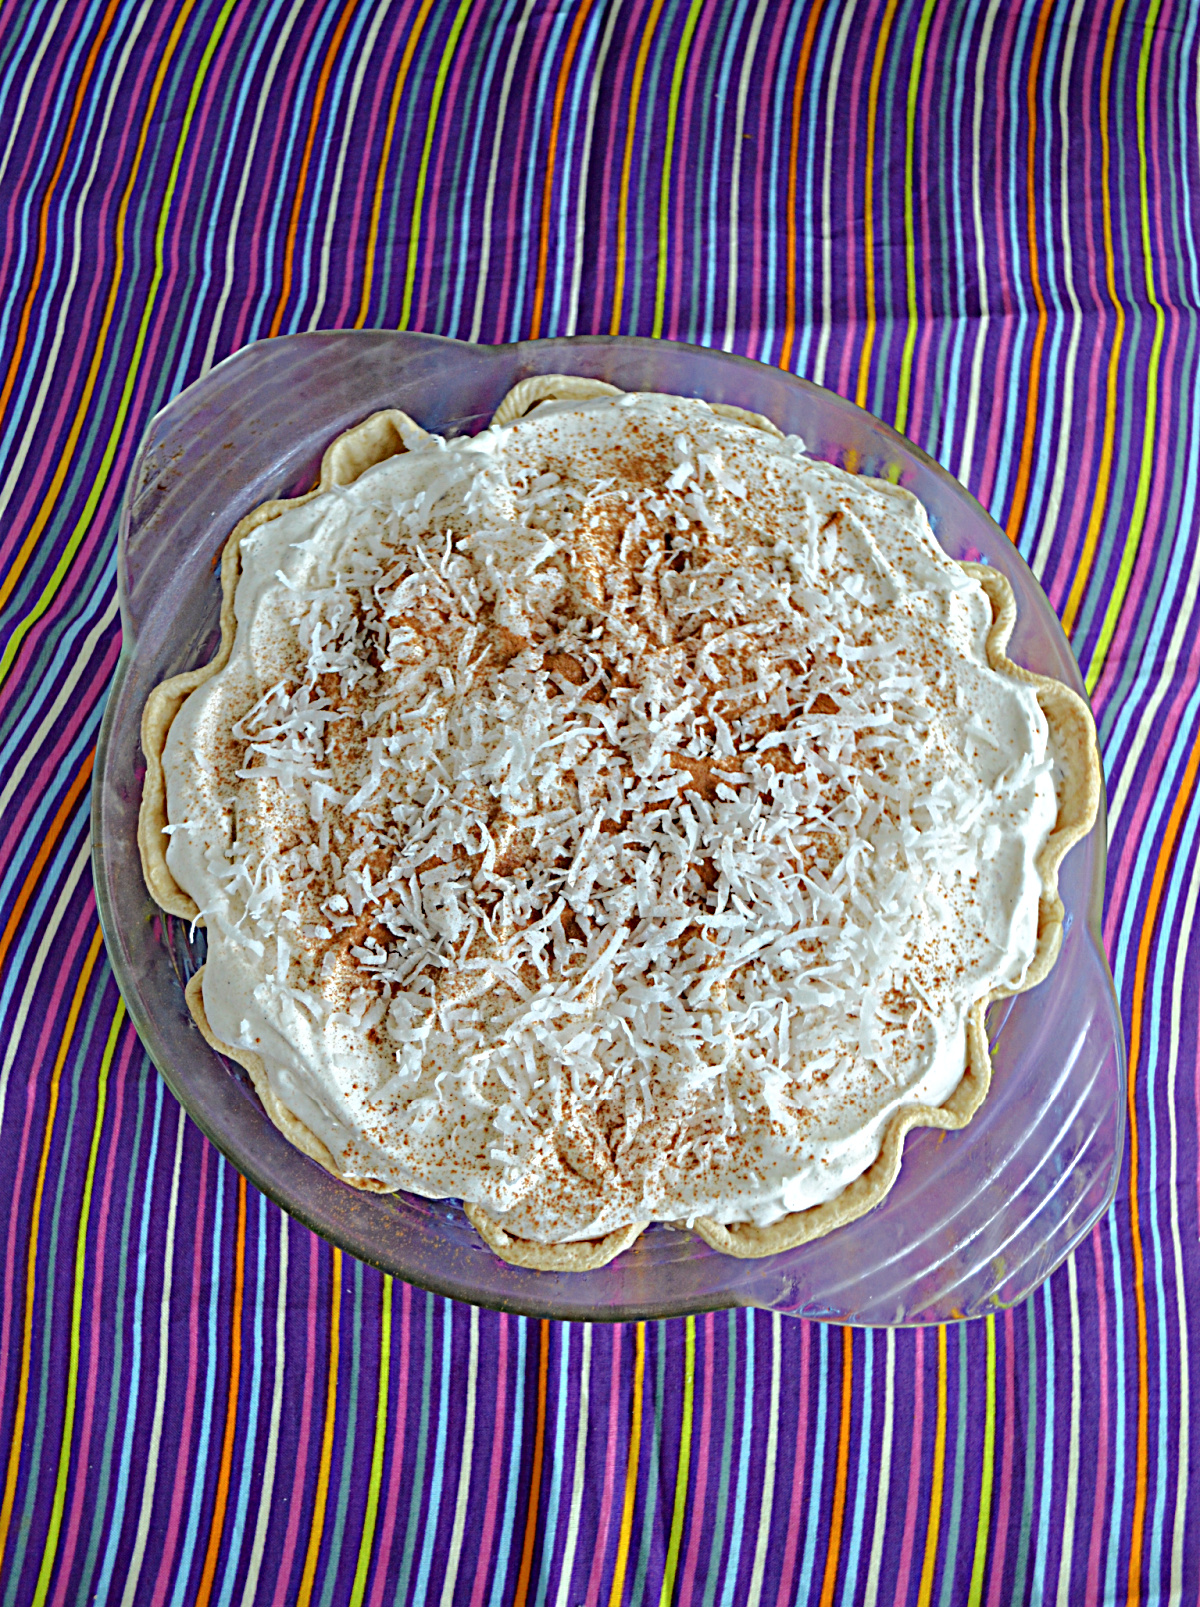 A pie topped with whipped cream, cinnamon, and coconut.